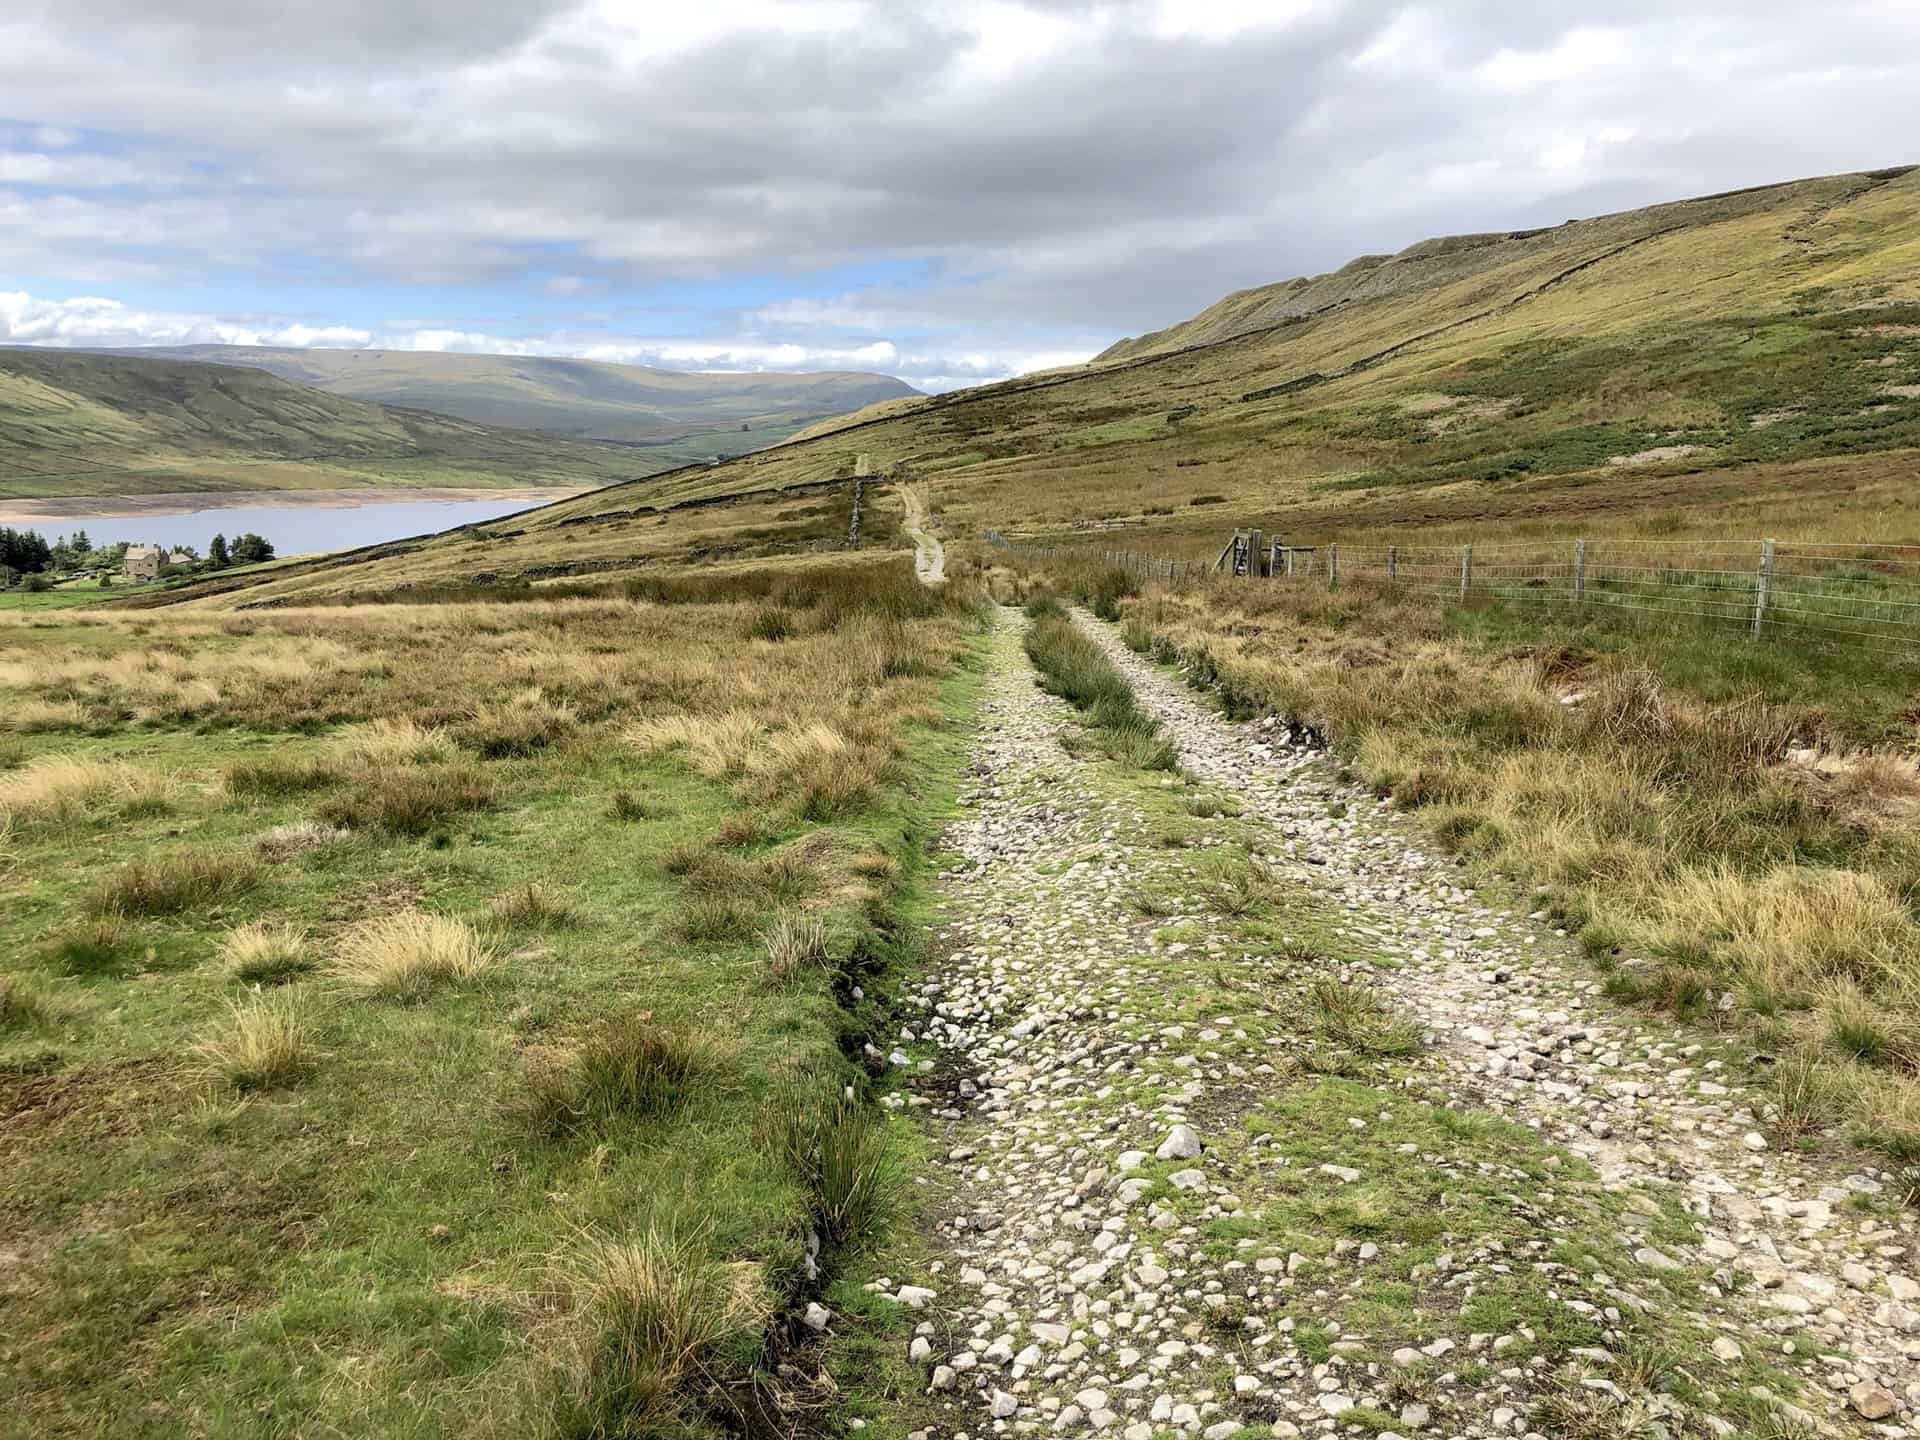 The approach to Scar House Reservoir.